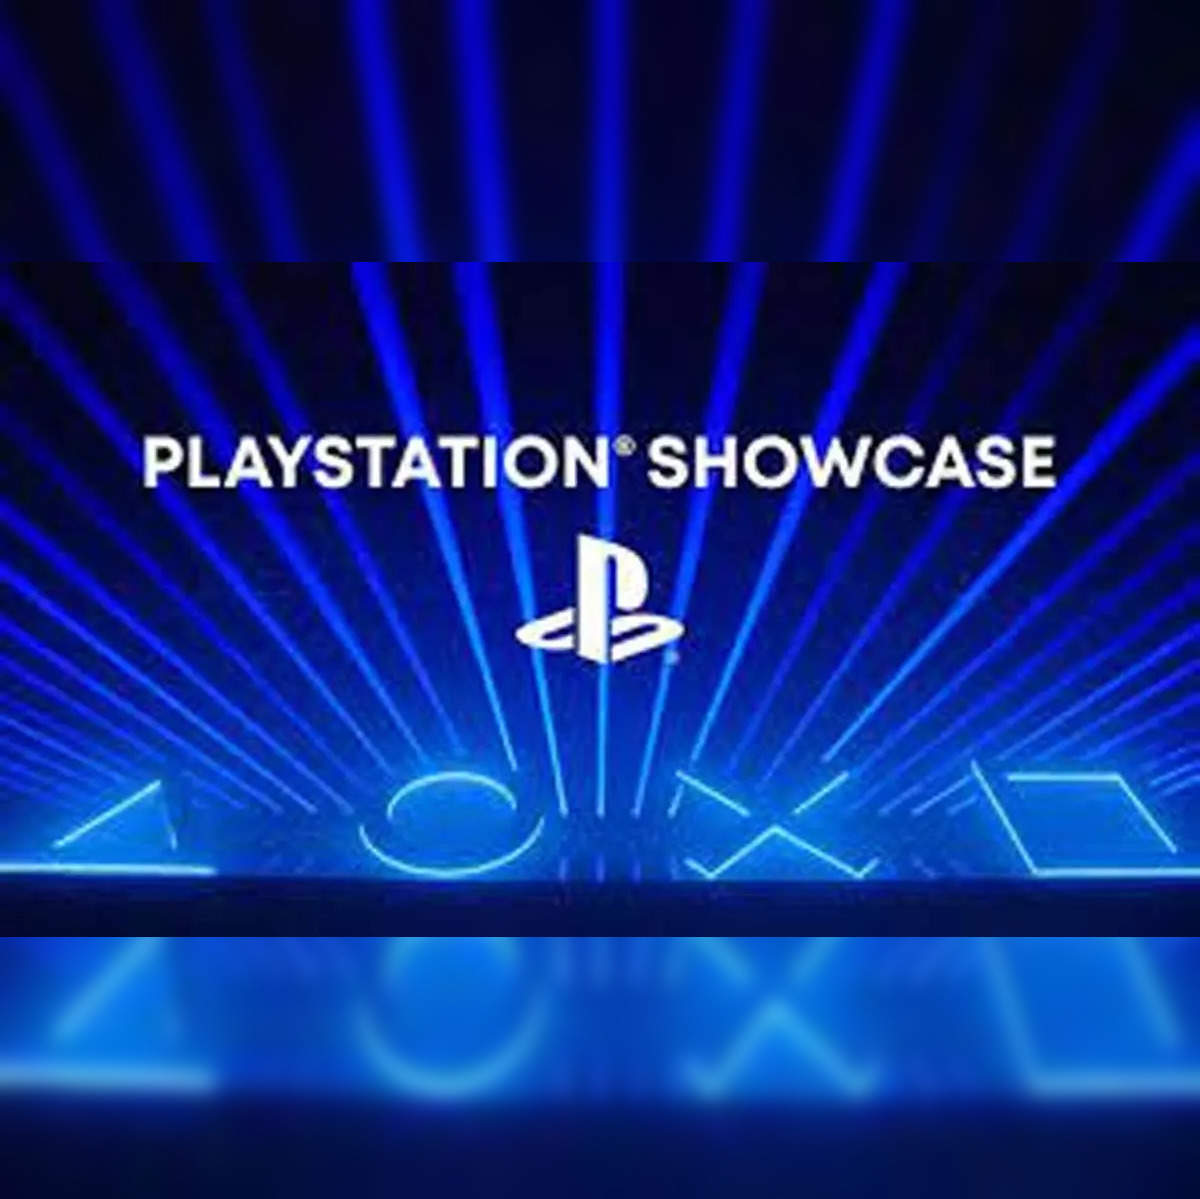 Watch the PlayStation State of Play September 2021 livestream here